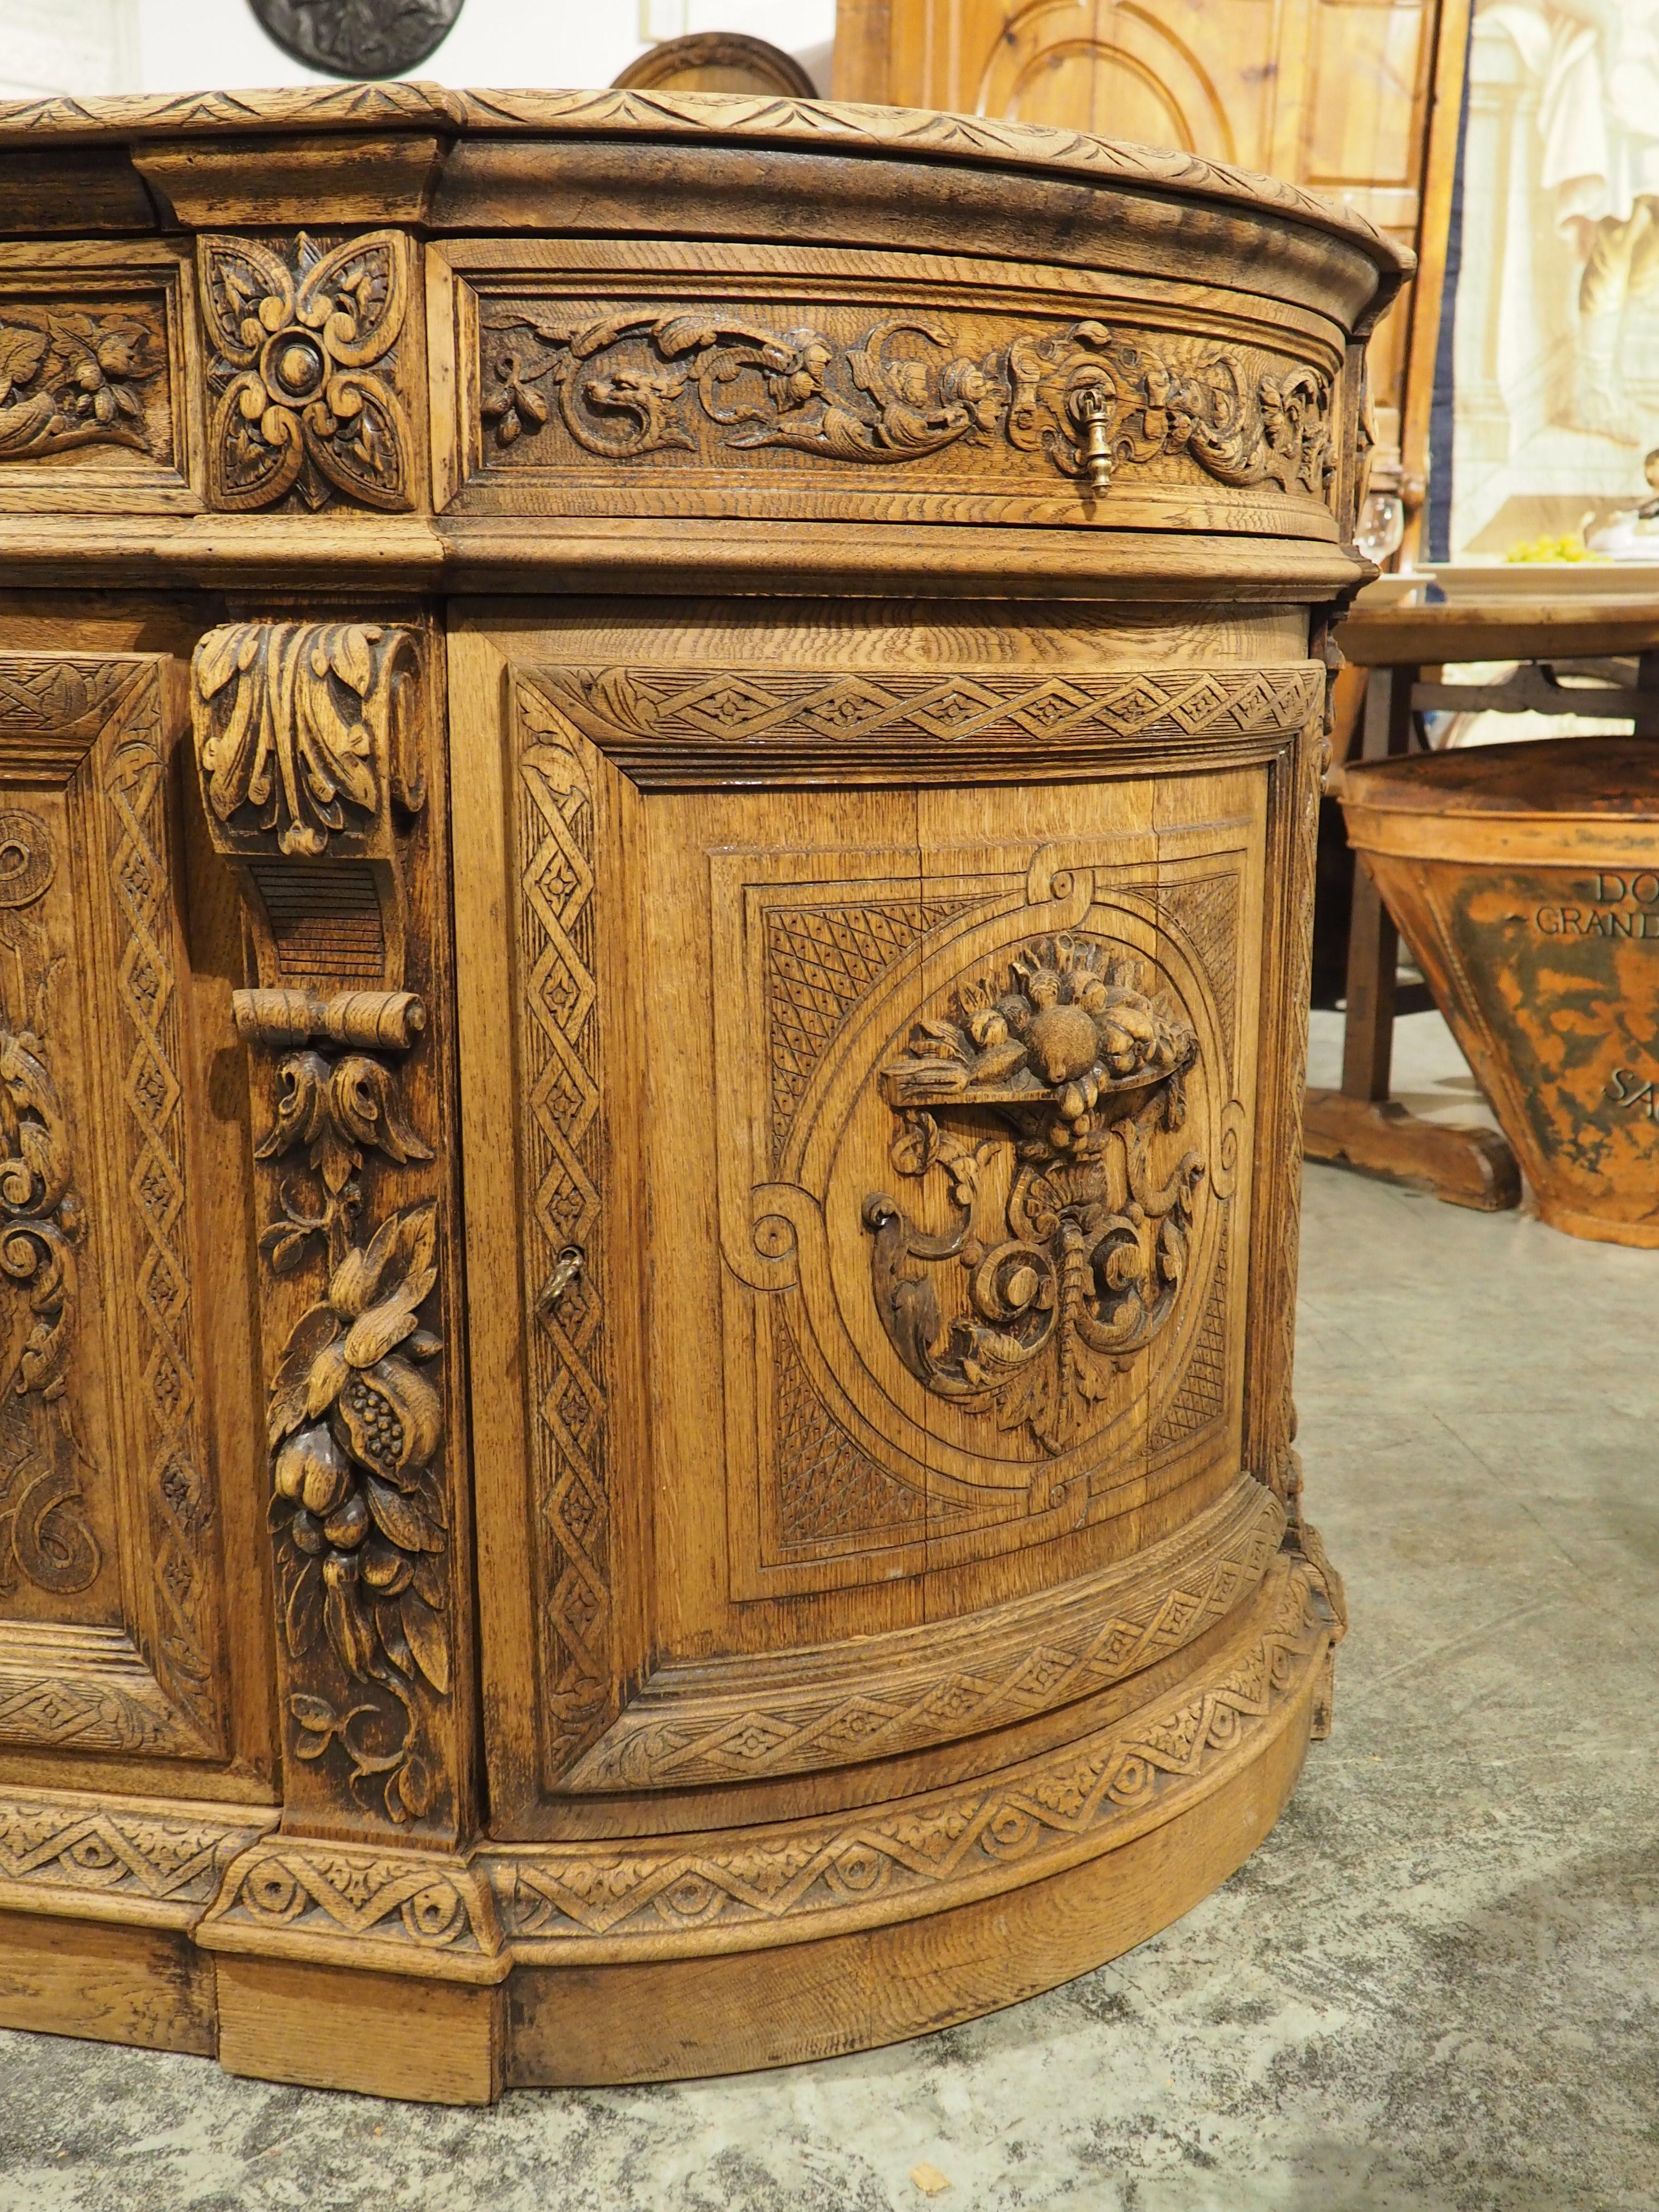 From France, circa 1880, this exceptional buffet features curved ends, giving the cabinet an overall demilune shape. Carved by hand by an immensely talented woodworker, the motifs on the two center doors depict a fowl trophy (left door) and a fish